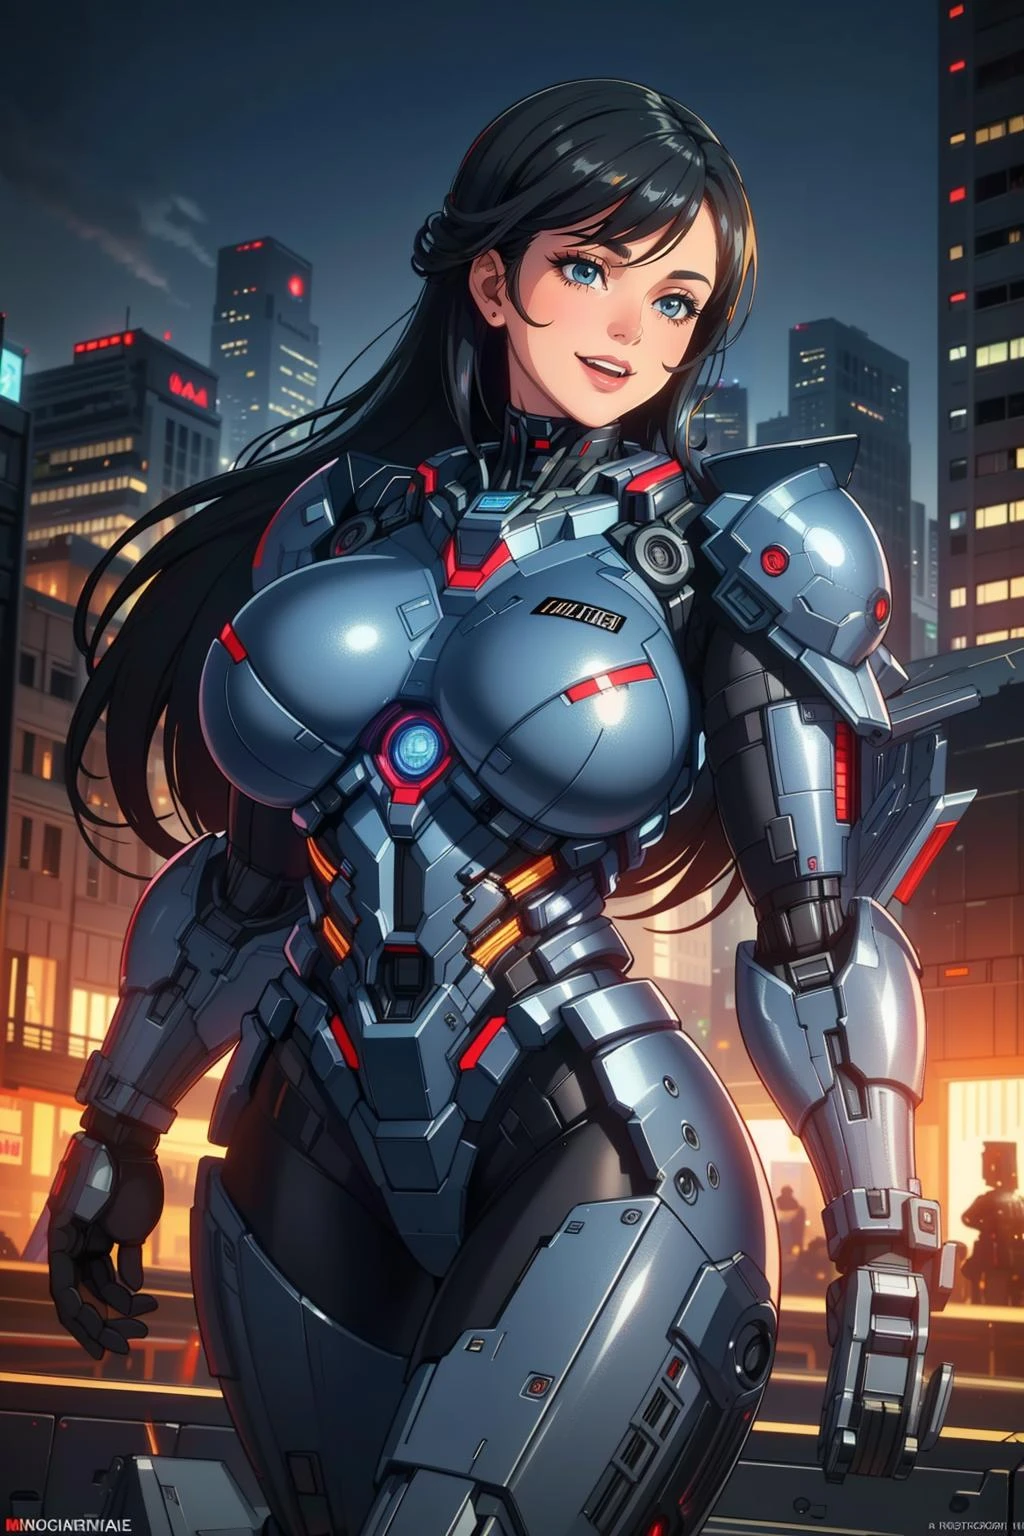 ((MAsterpiece, best quAlity,edgQuAlity)),微笑,兴奋的,
edgMechA, A ((giAnt womAn)) in robot suit stAnding in front of A city At night ,womAn weAring edgMechA, mechA suit 